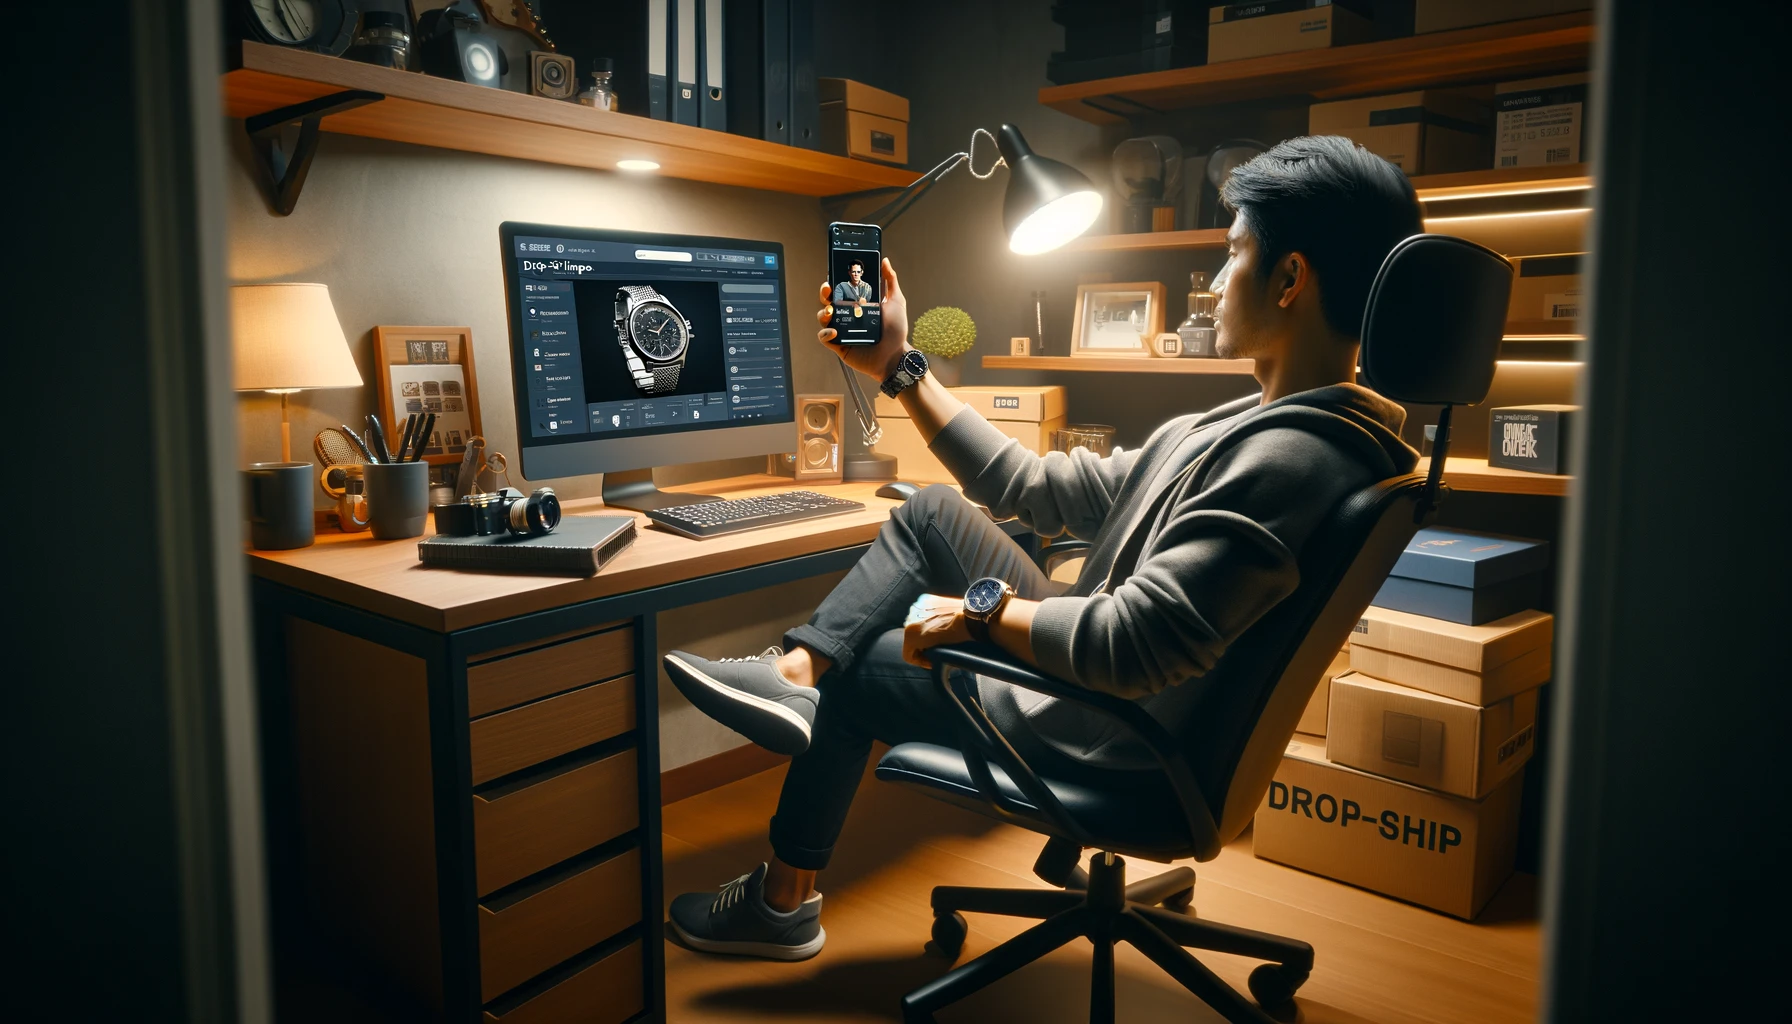 A home office scene featuring an Asian man sitting at his computer, working on his drop-ship store. Simultaneously, he's taking a selfie with his smartphone, holding a watch in his hand to showcase it. The computer screen displays the interface of his online store, possibly with watch listings. The office is modern and well-organized, with a sleek desk and comfortable chair. The lighting is ambient and warm, creating a professional yet cozy atmosphere. The scene captures a blend of business and personal branding, rendered in a photorealistic style, resembling a photo taken with a Sony Alpha A7R III camera and a Sony FE 24-70mm f/2.8 GM lens, aspect ratio 16:9.